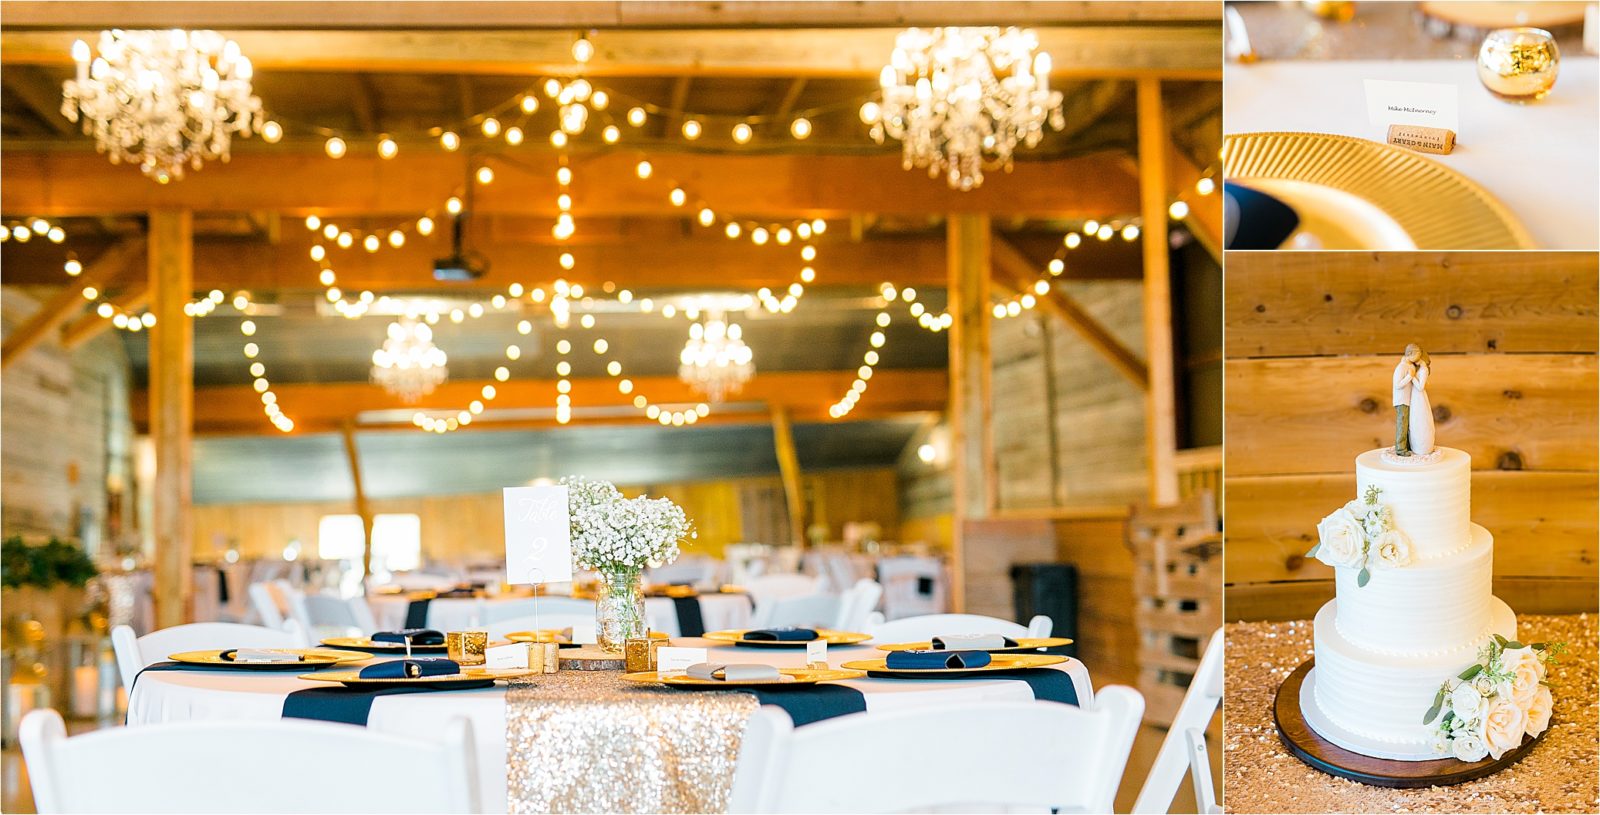 A shimmery table runner, baby's breath, navy napkins, gold chargers and pretty cafe lights inside the red barn at Rustic Grace Estate in Van Alstyne, Texas 